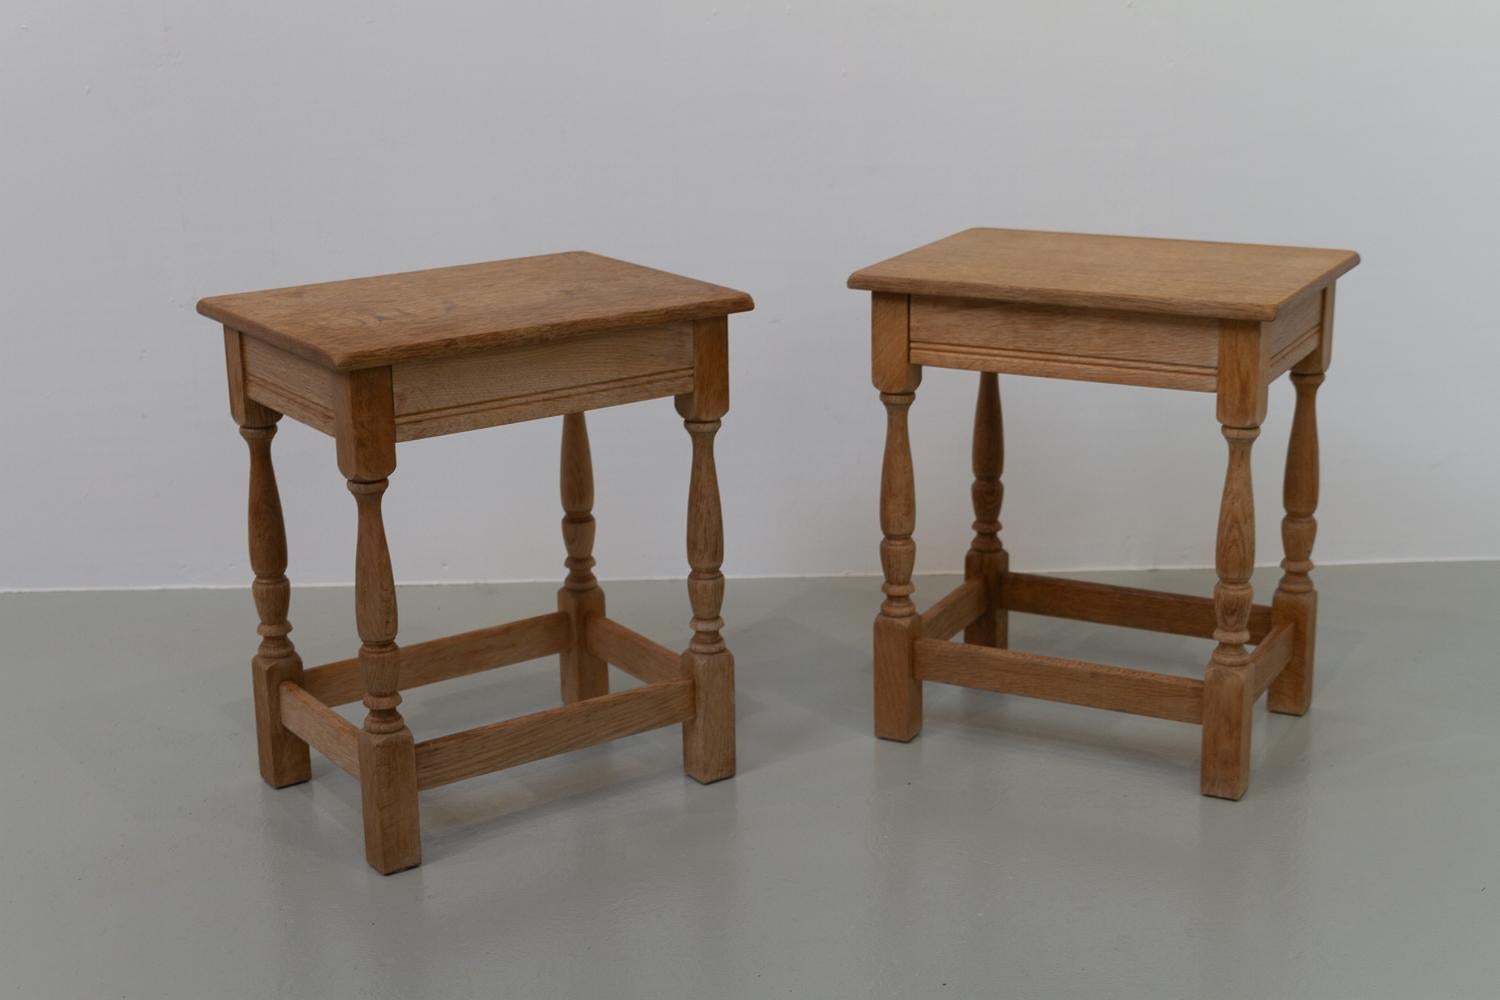 Danish Modern Brutalist Bedside Tables in Oak, 1960s. Set of 2.
Pair of Scandinavian Modern brutalists style nightstands in Nordic oak with drawer. Made by master carpenter Anker Sørensen, Denmark in the 1960s.
Very good condition, drawers slides